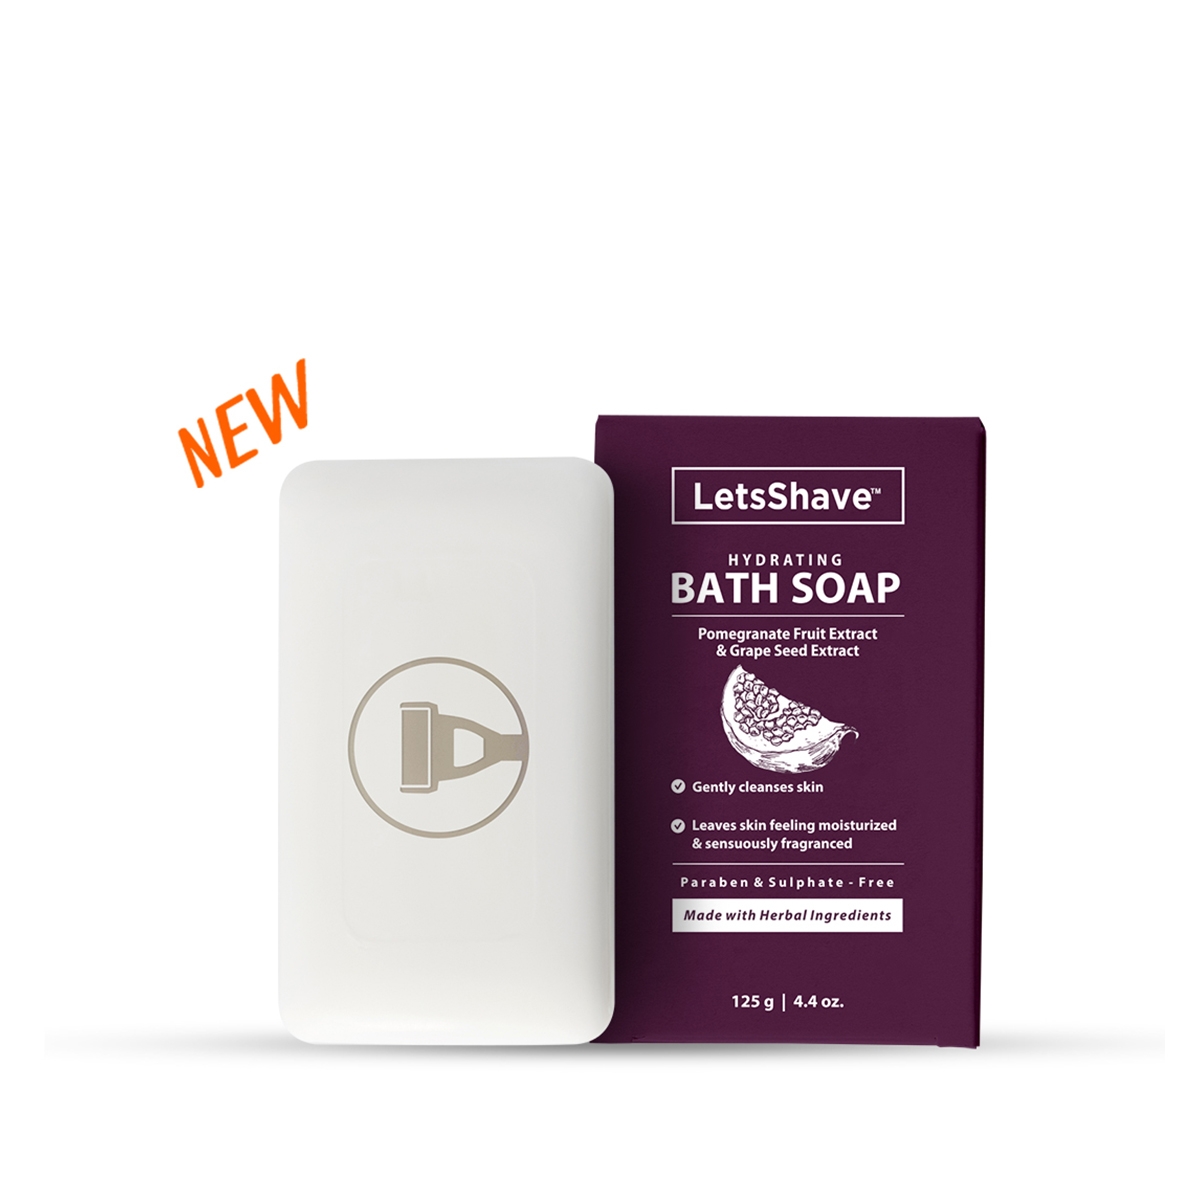 LetsShave | LetsShave Bath Soap - Hydrating & Relaxing Aromatic Therapy - 120g